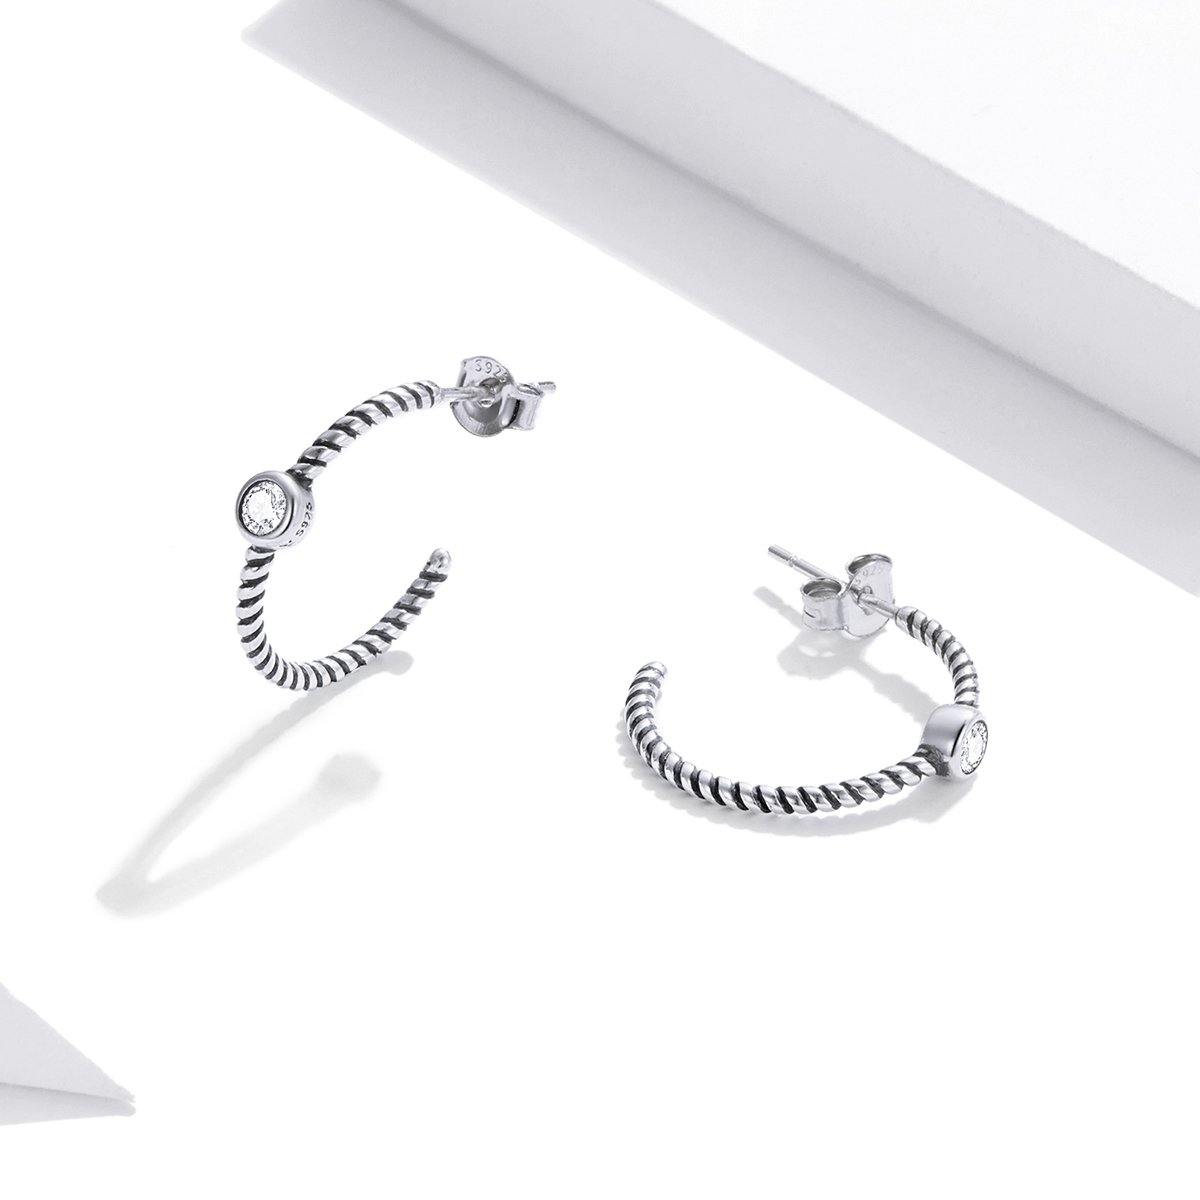 Twisted Lines 925 Sterling Silver Earrings - Aisllin Jewelry